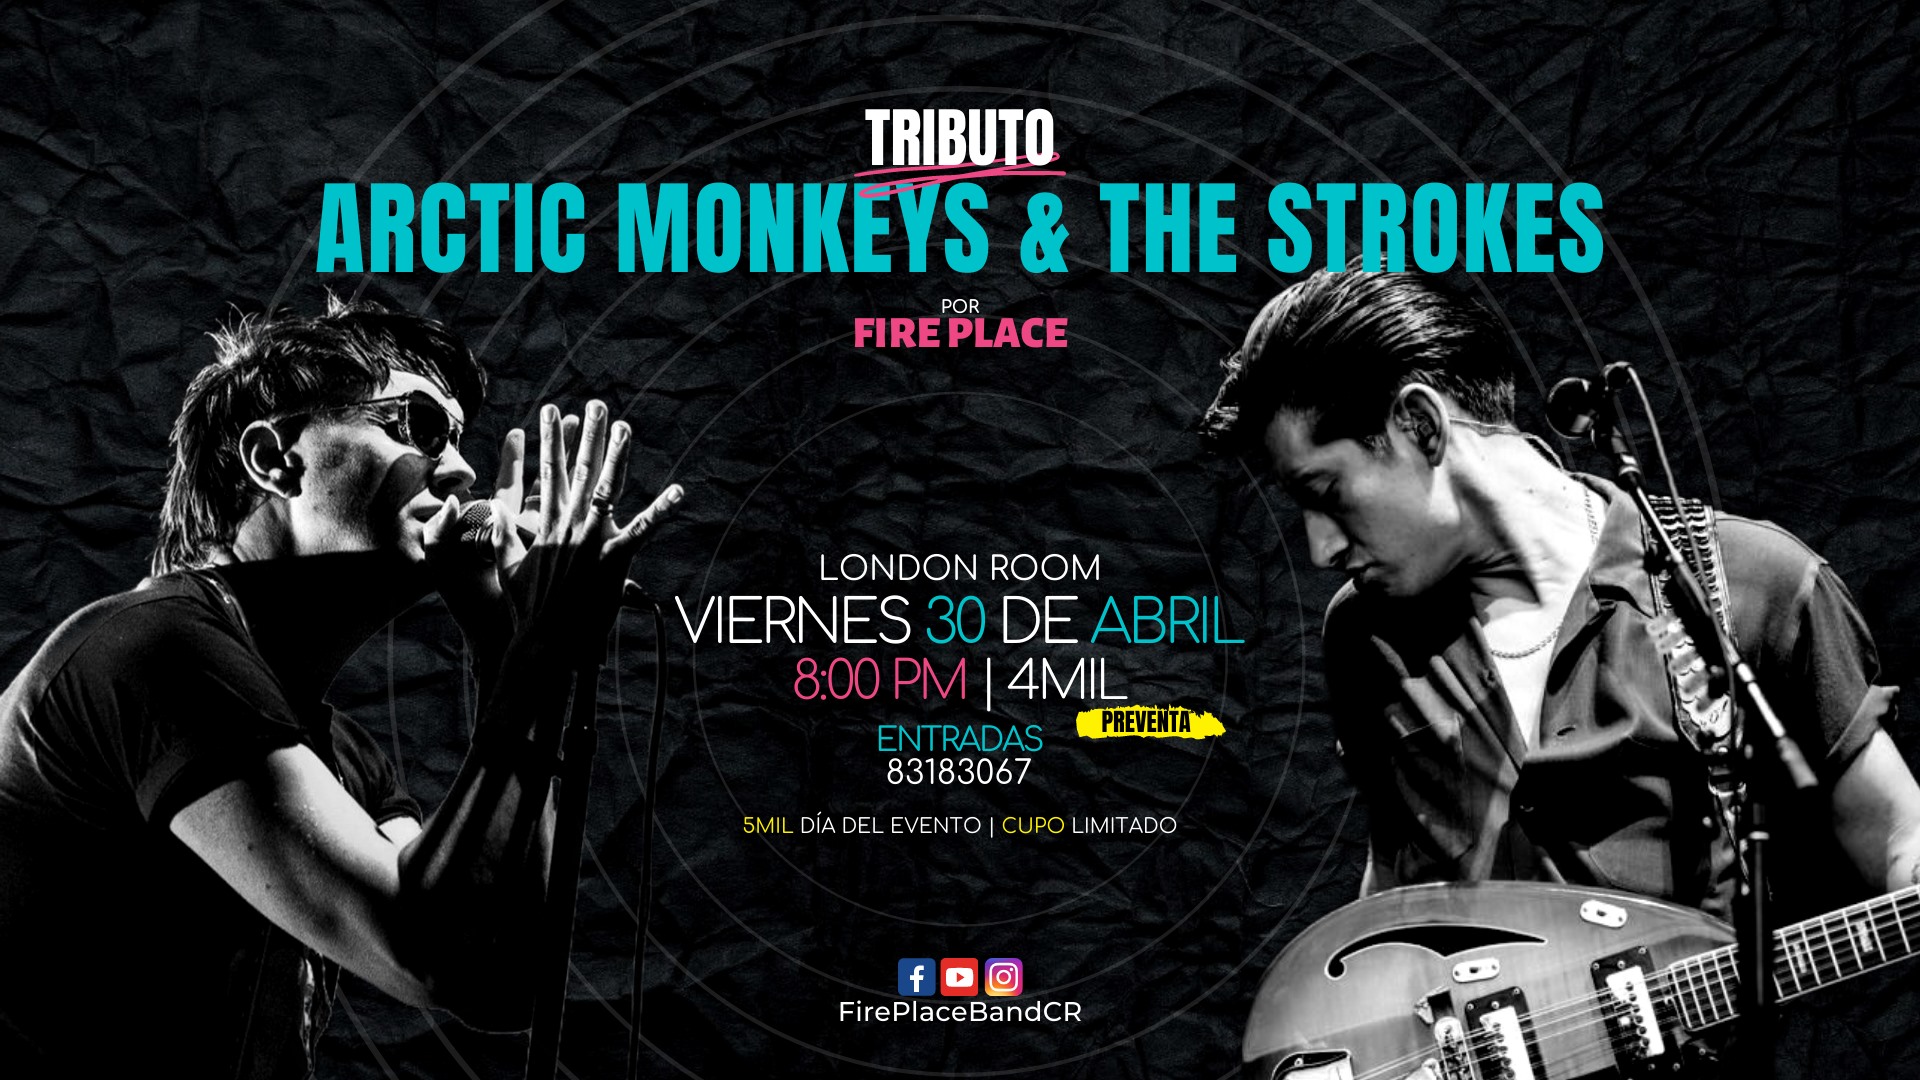 Tributo a Arctic Monkeys & The Strokes por Fire Place